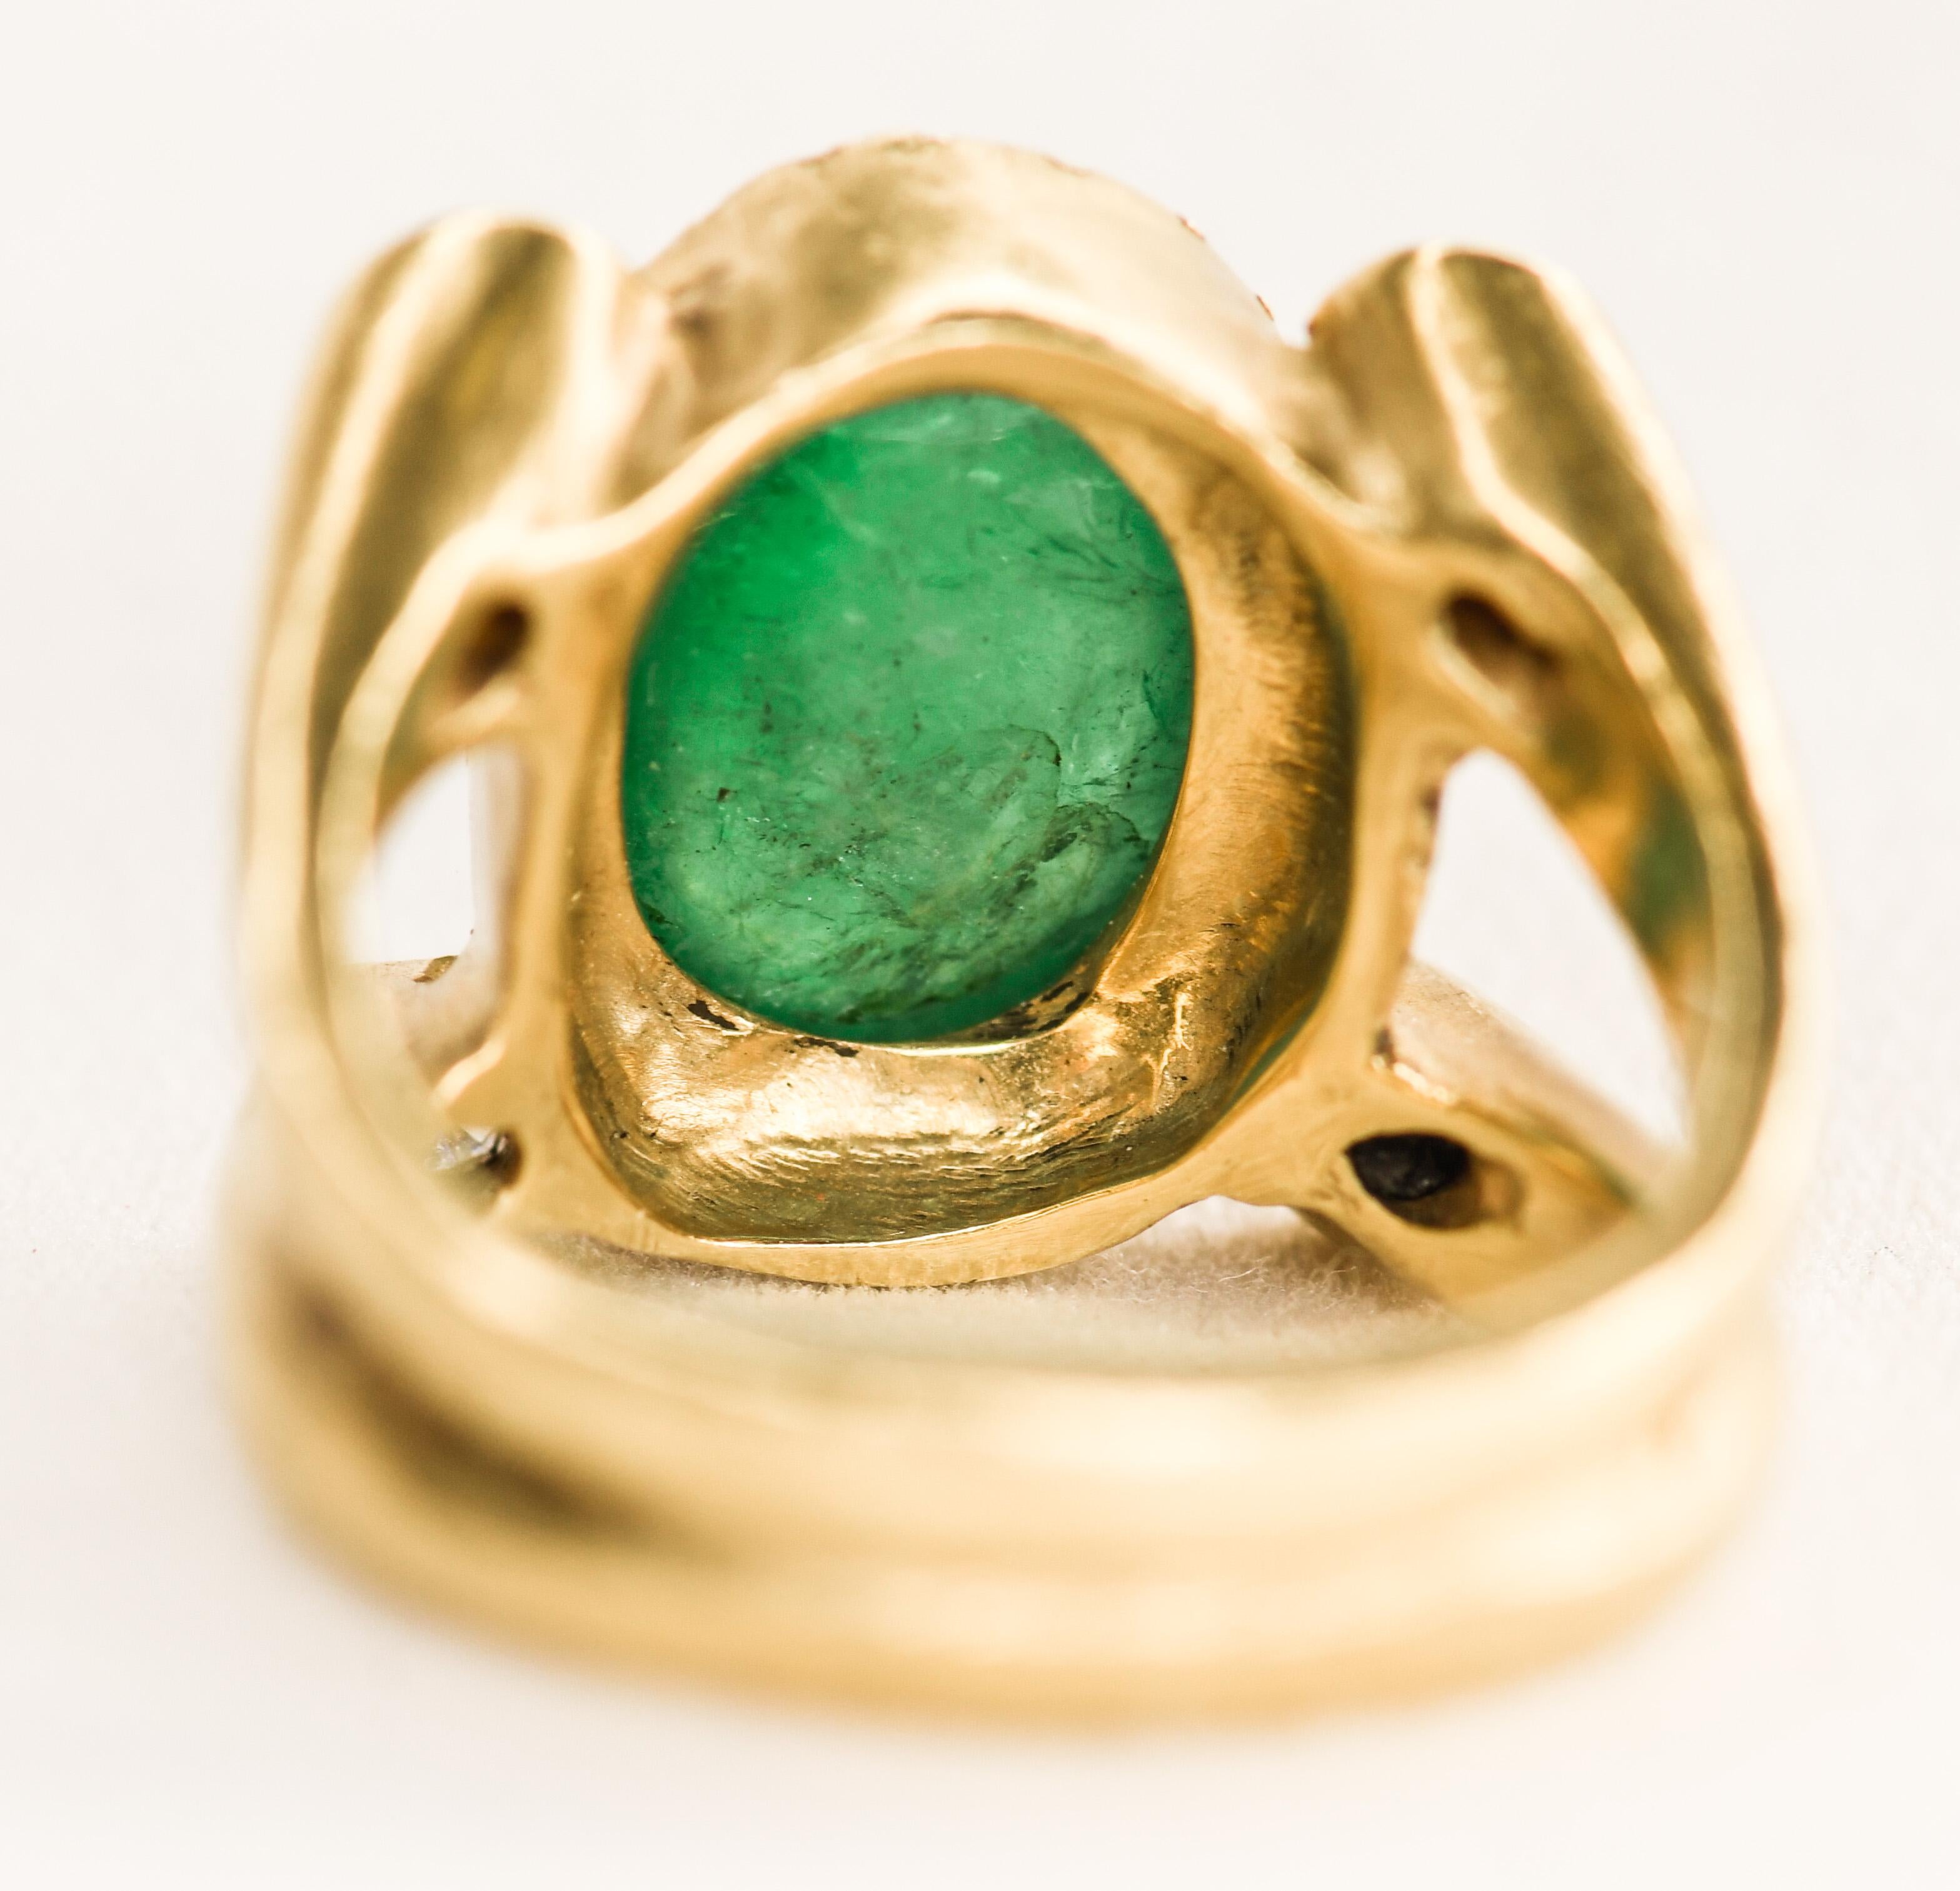 This handcrafted 18K yellow gold ring features an oval 6 carat cabochon Colombian emerald enhanced with approximately 40 points of round white diamonds.  Appropriately hallmarked and signed 